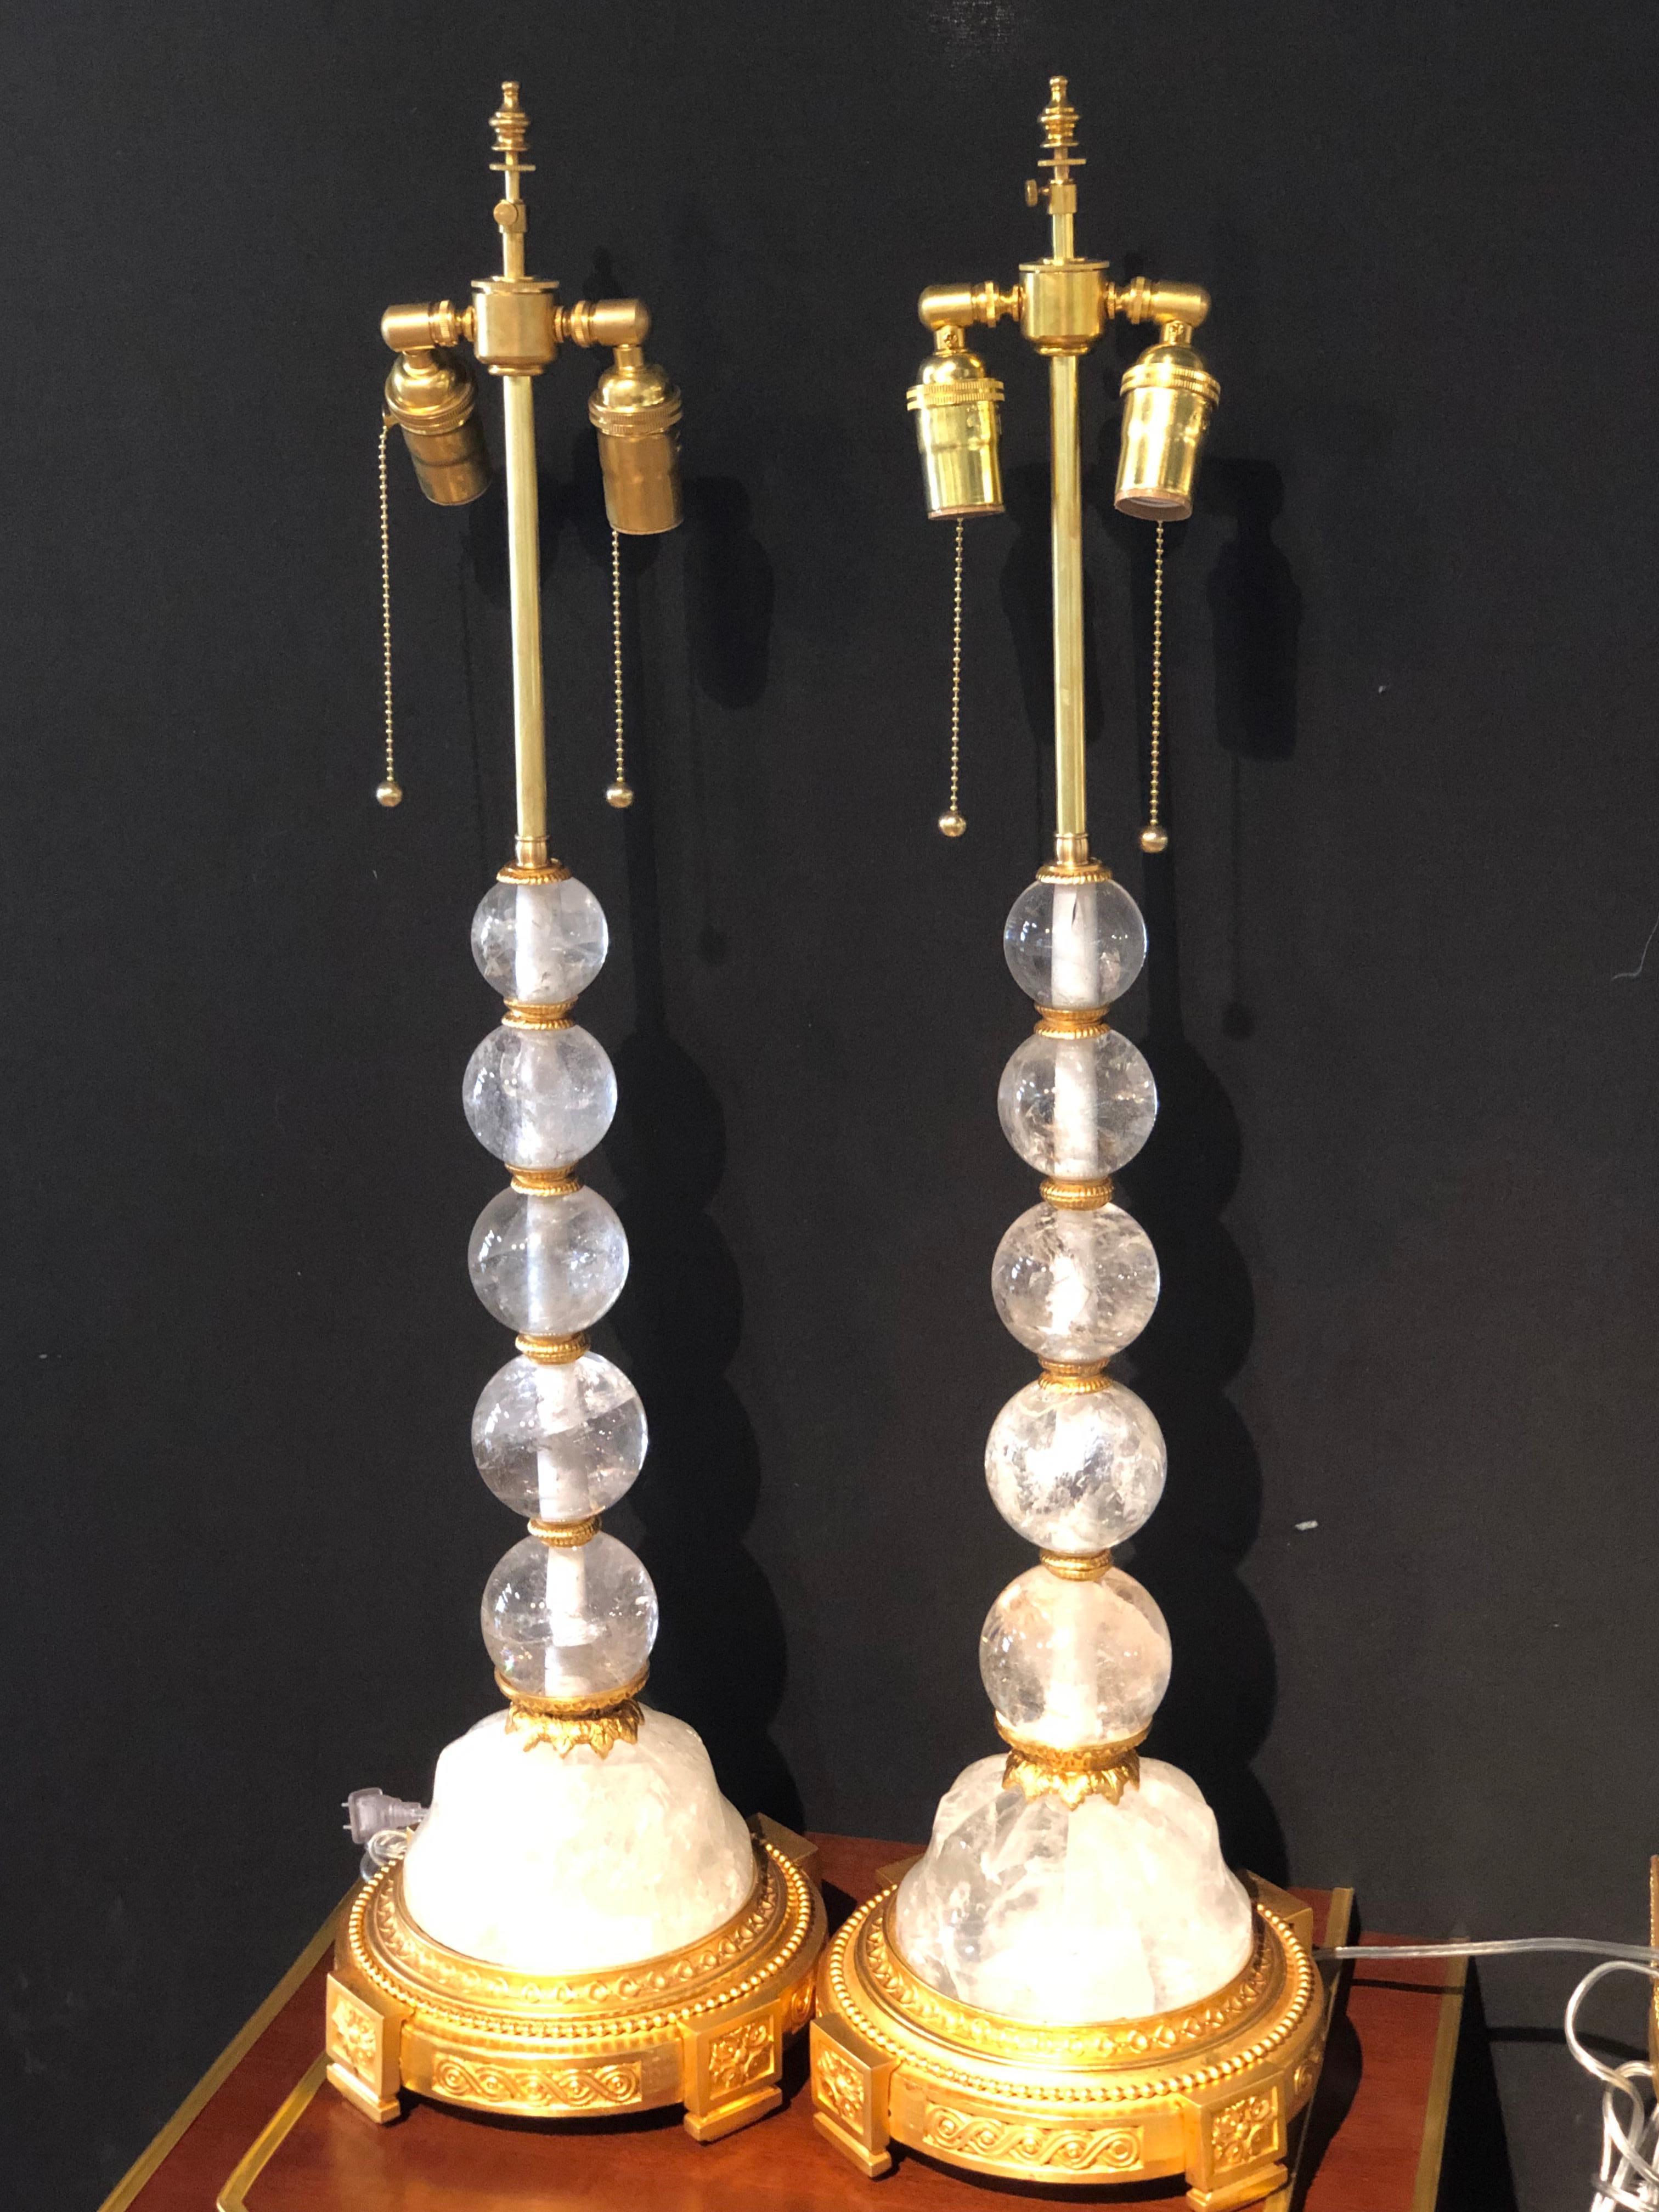 A fine pair of rock crystal Hollywood regency or Art Deco style table lamps. The pair having gilt metal supports on a rock form crystal base having a group of graduating rock crystals balls leading to double light sockets with match finials. 
These